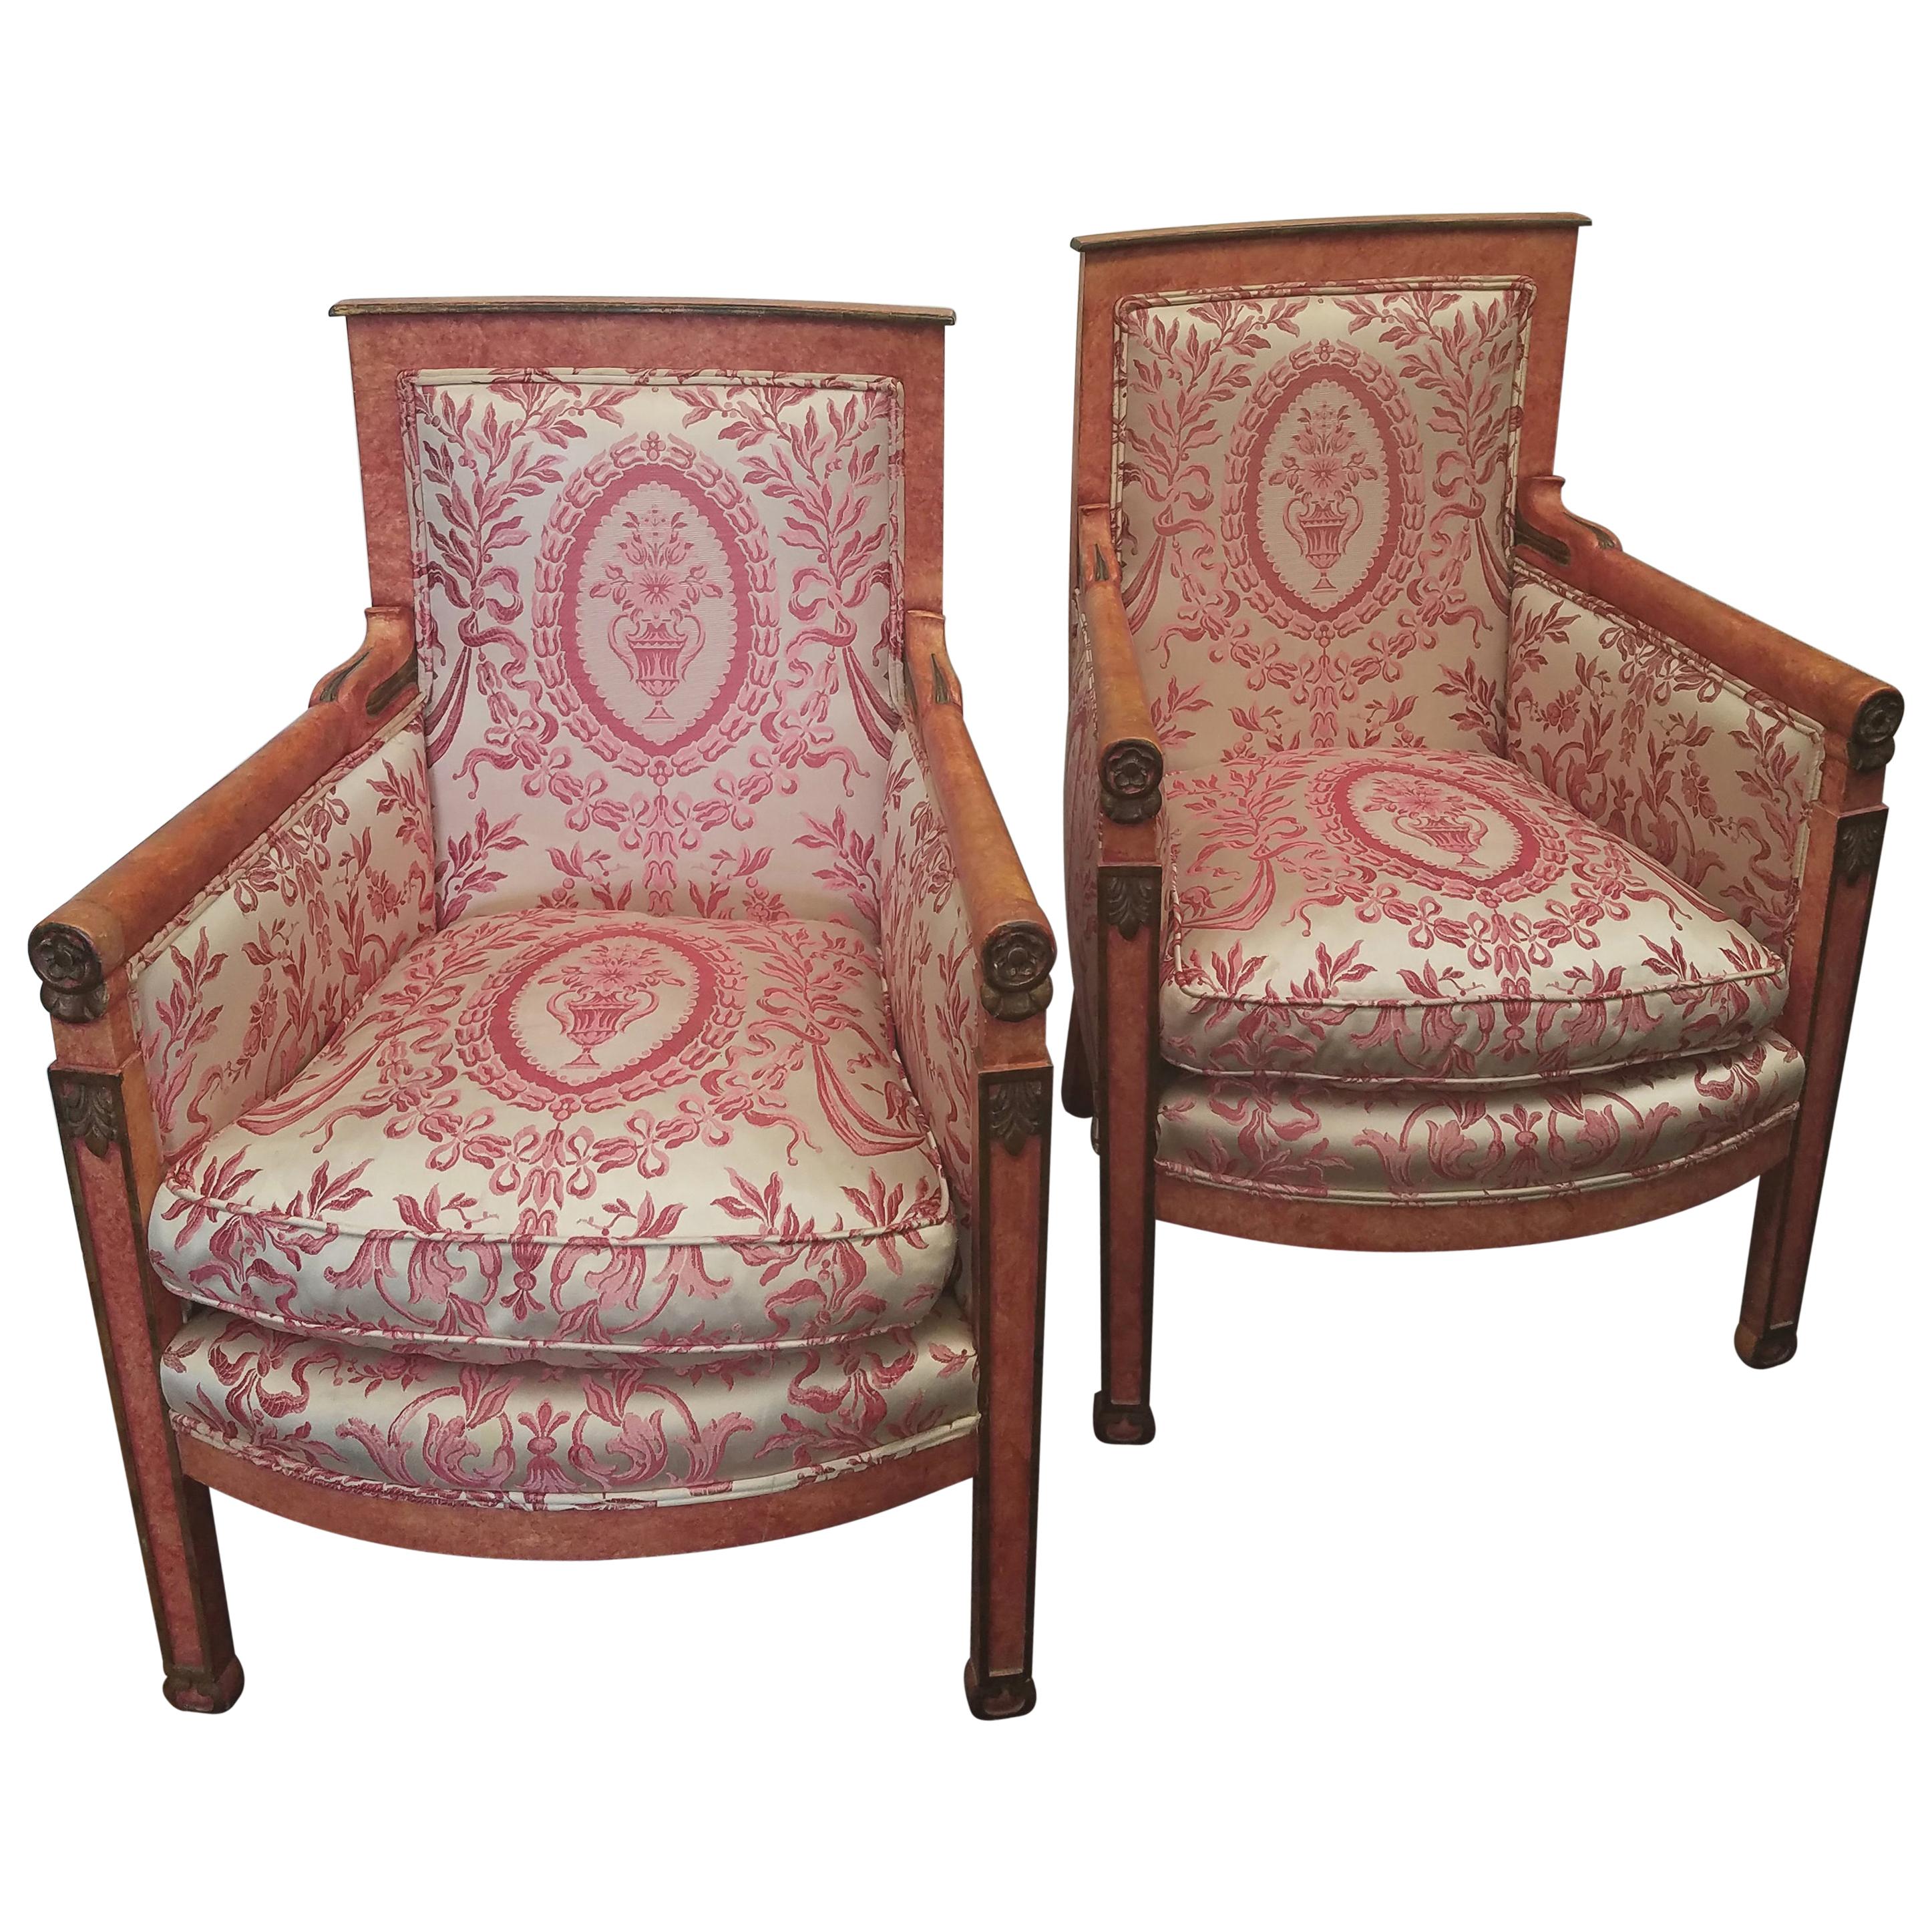 Pair of Coral Painted Empire Armchairs with Silk Upholstery